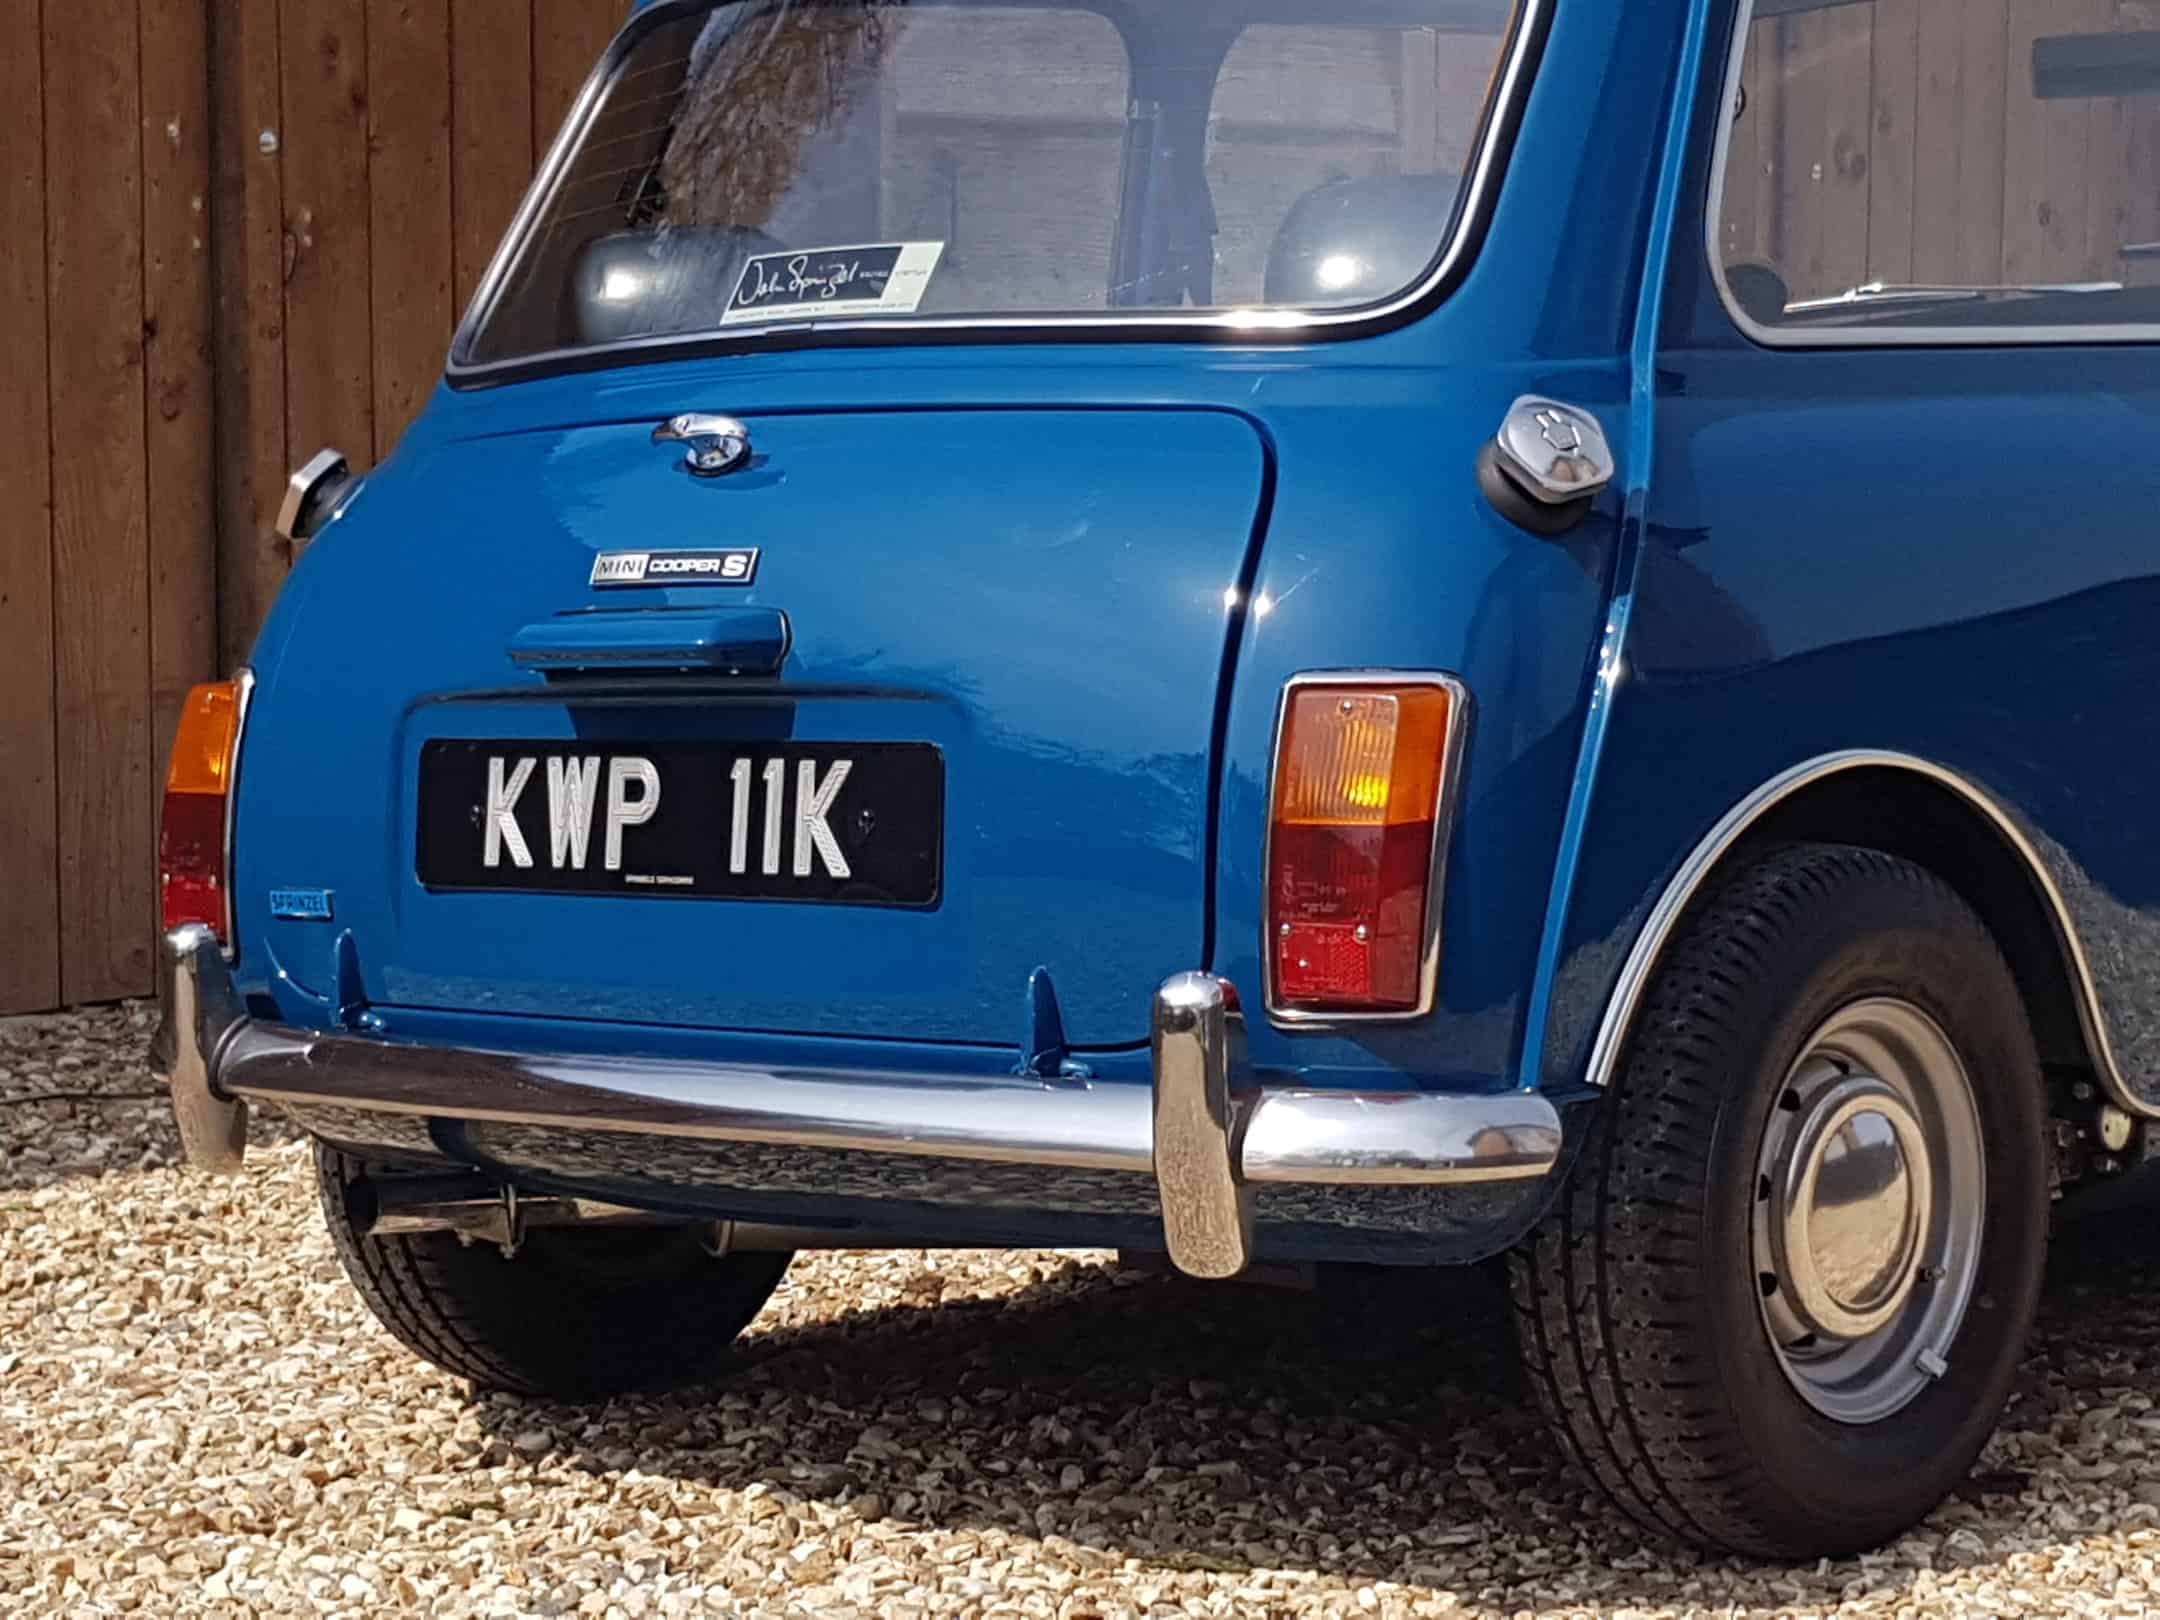 ** NOW SOLD ** Very Special 1971 MK3 Cooper S 1275 ** Two Owners In 51 Years **